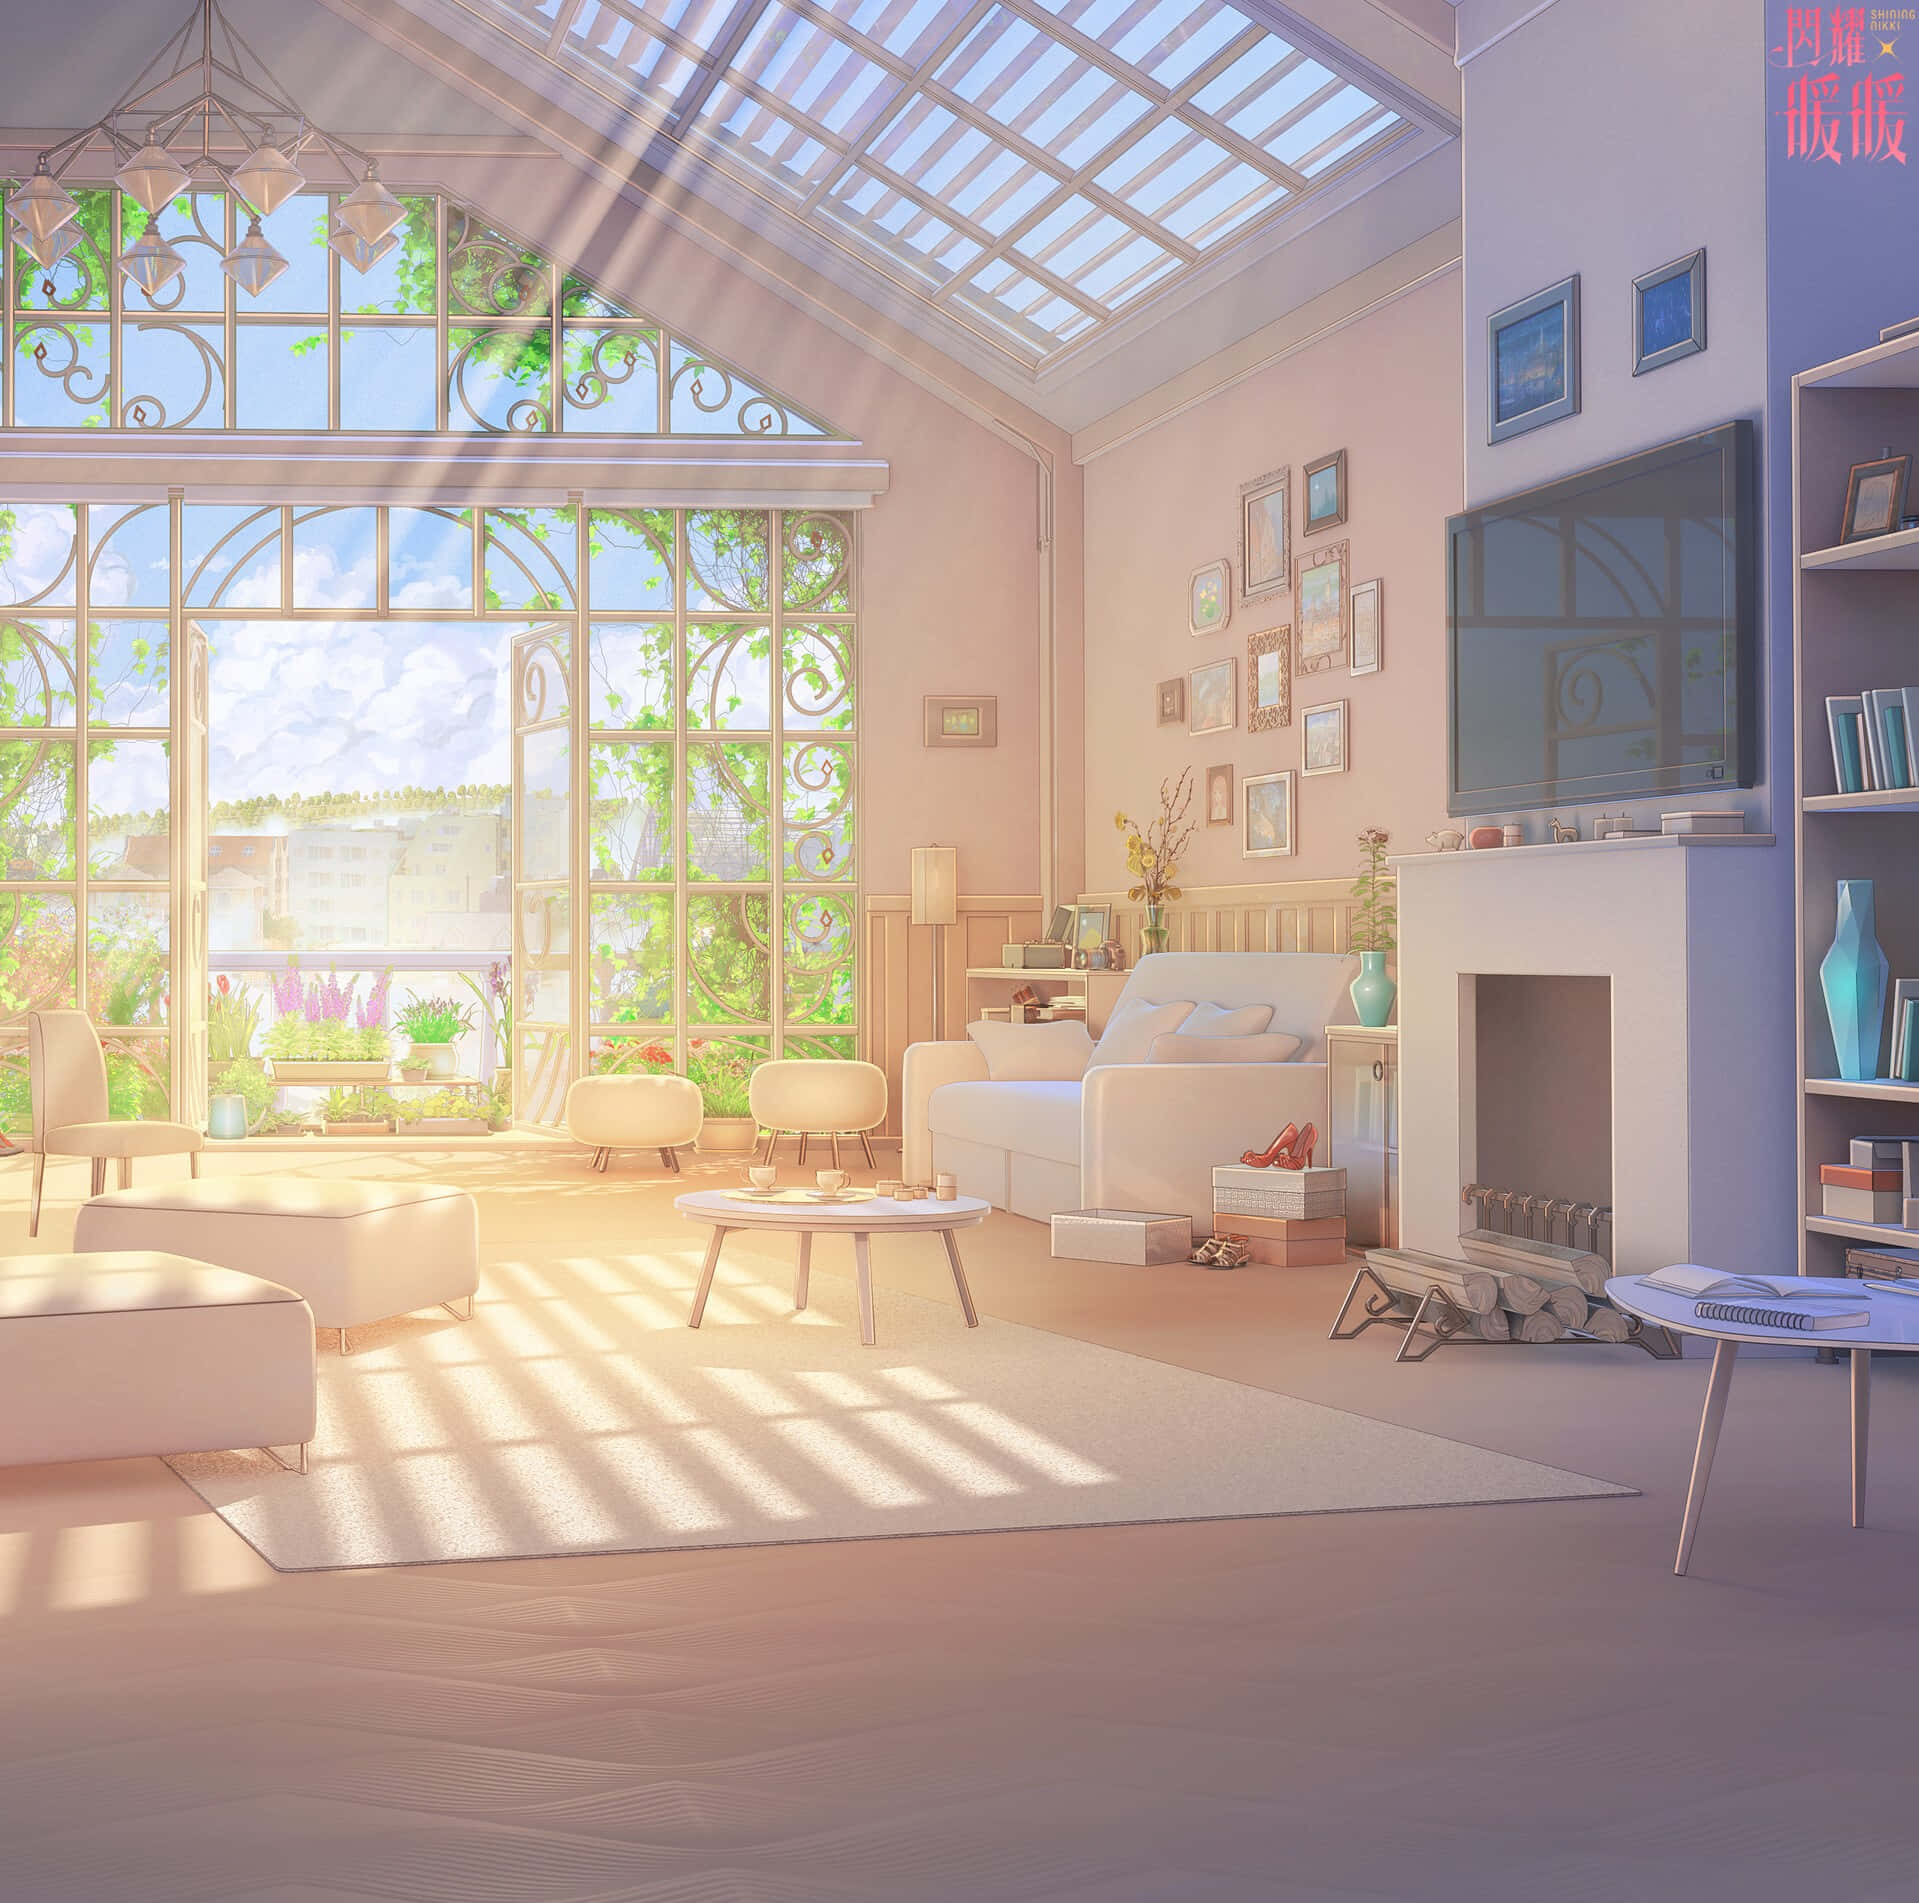 Enjoy the cuteness of anime-inspired bedroom